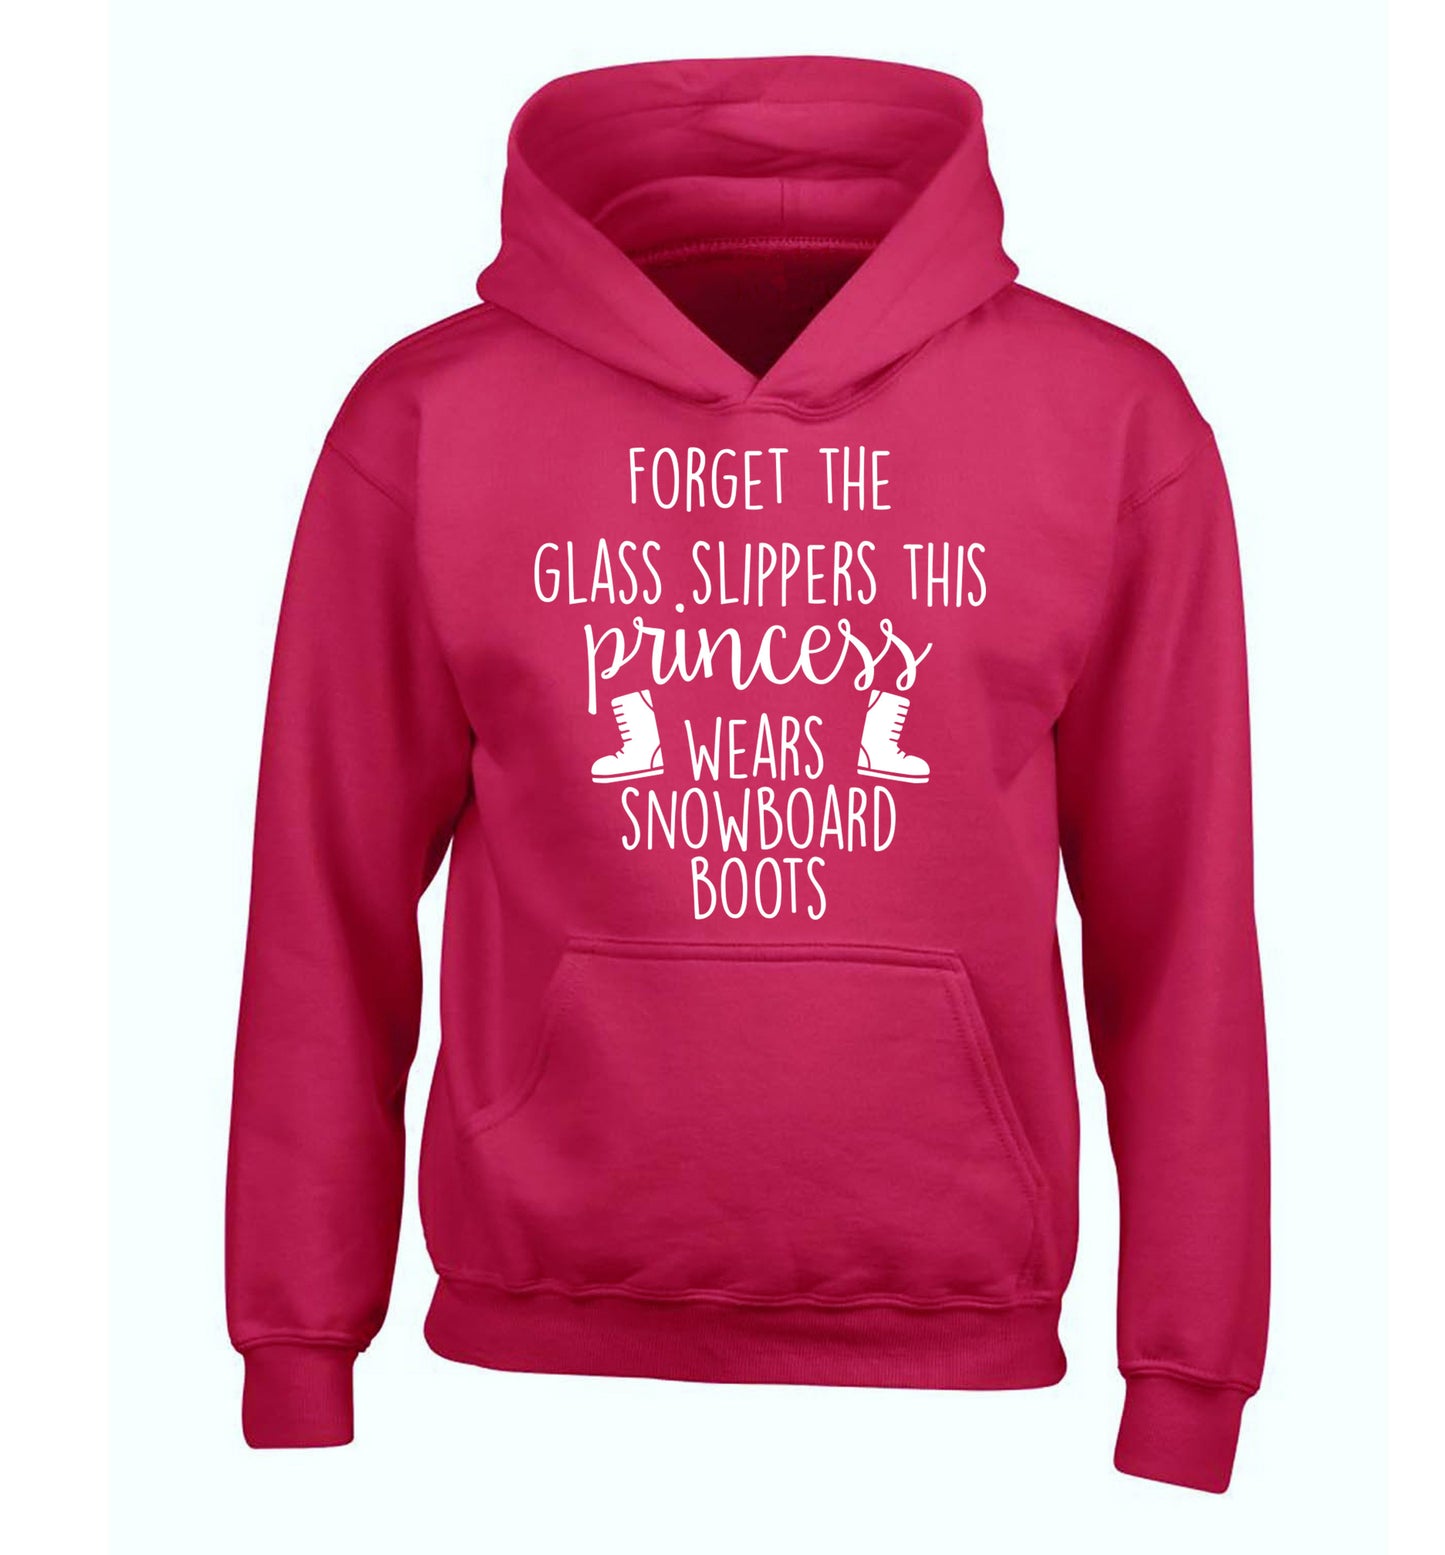 Forget the glass slippers this princess wears snowboard boots children's pink hoodie 12-14 Years